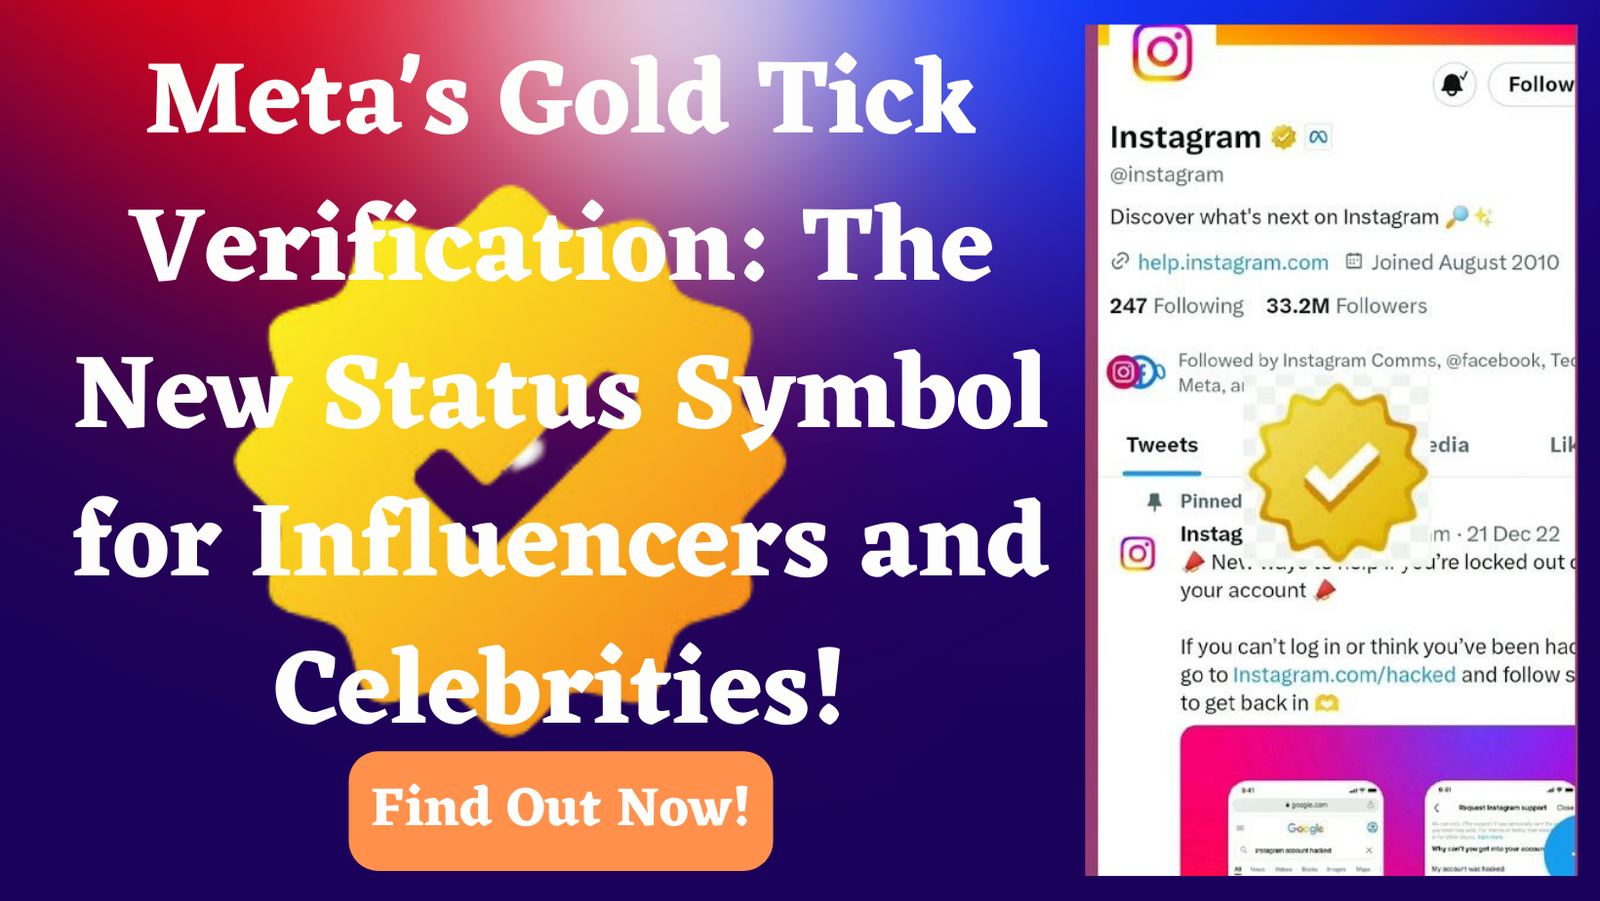 Meta's Gold Tick Verification The New Status Symbol for Influencers and Celebrities!